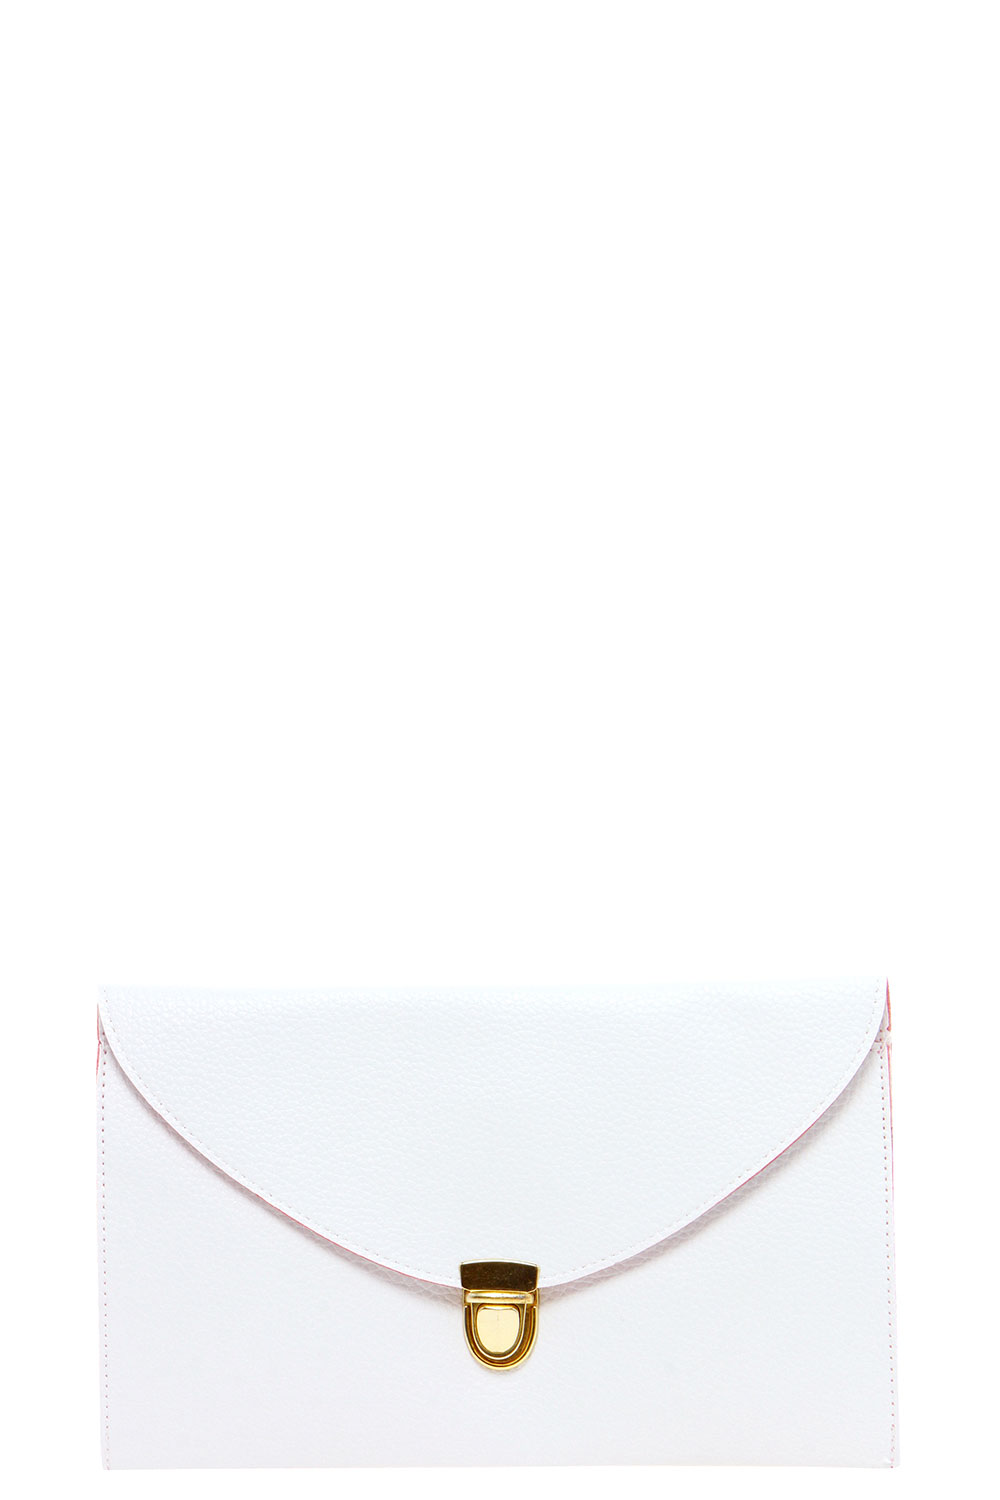 Lily Clasp Fasten Clutch Bag - white,